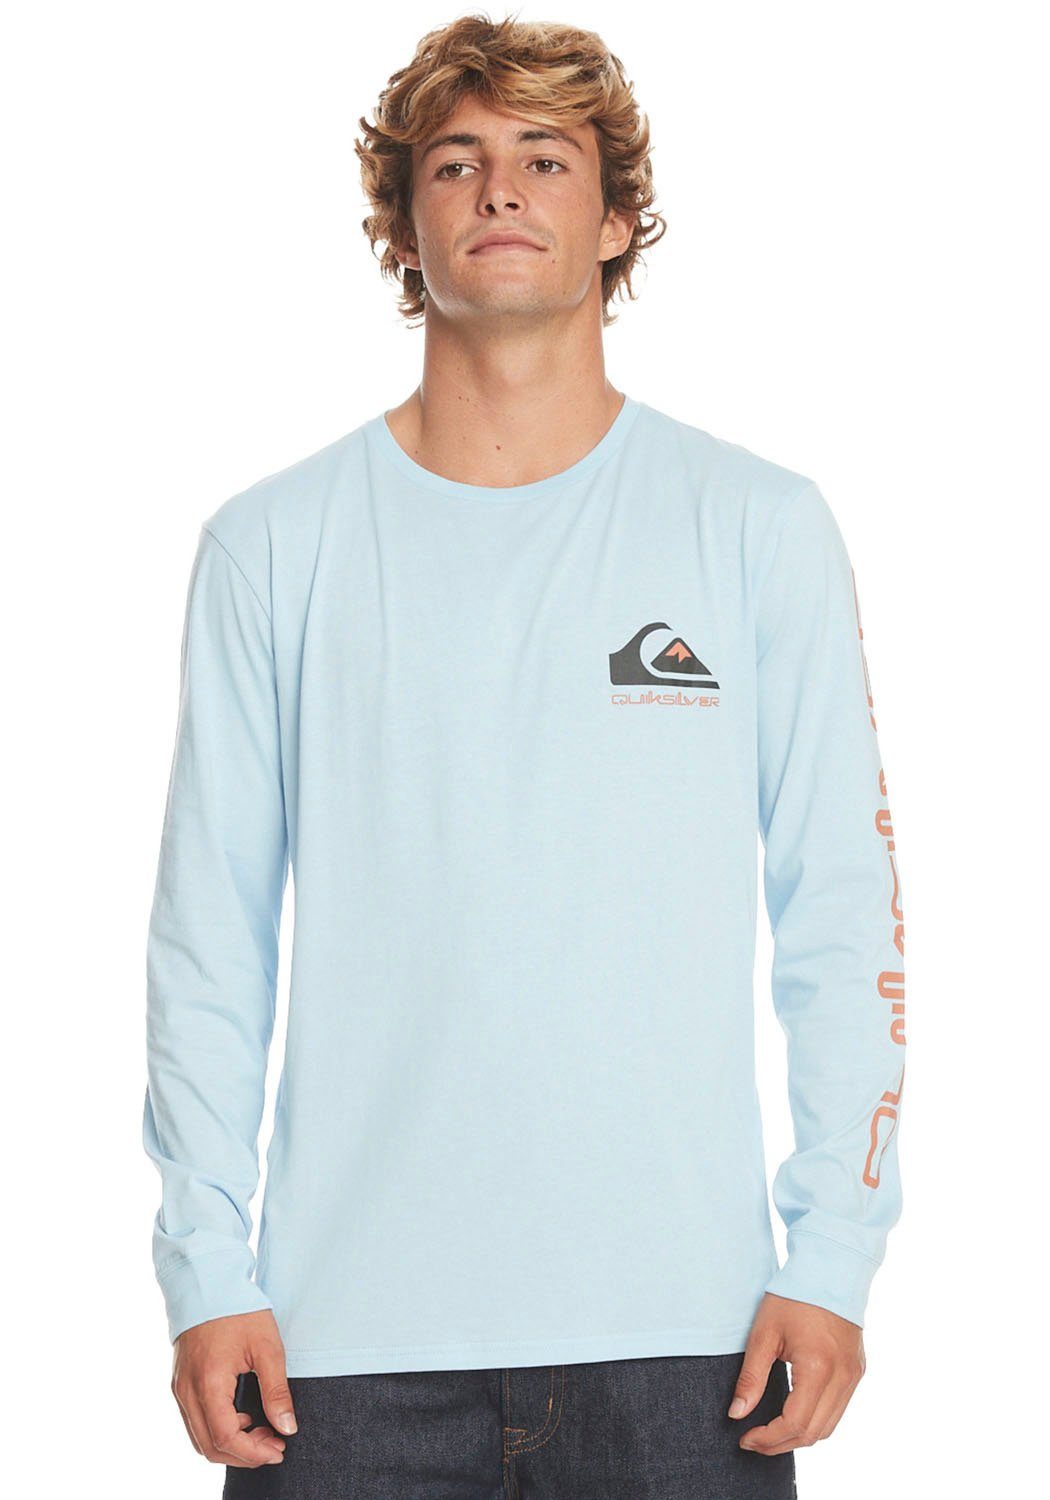 Quiksilver T-Shirt OMNILOGO TEES BFT0 Clear Sky